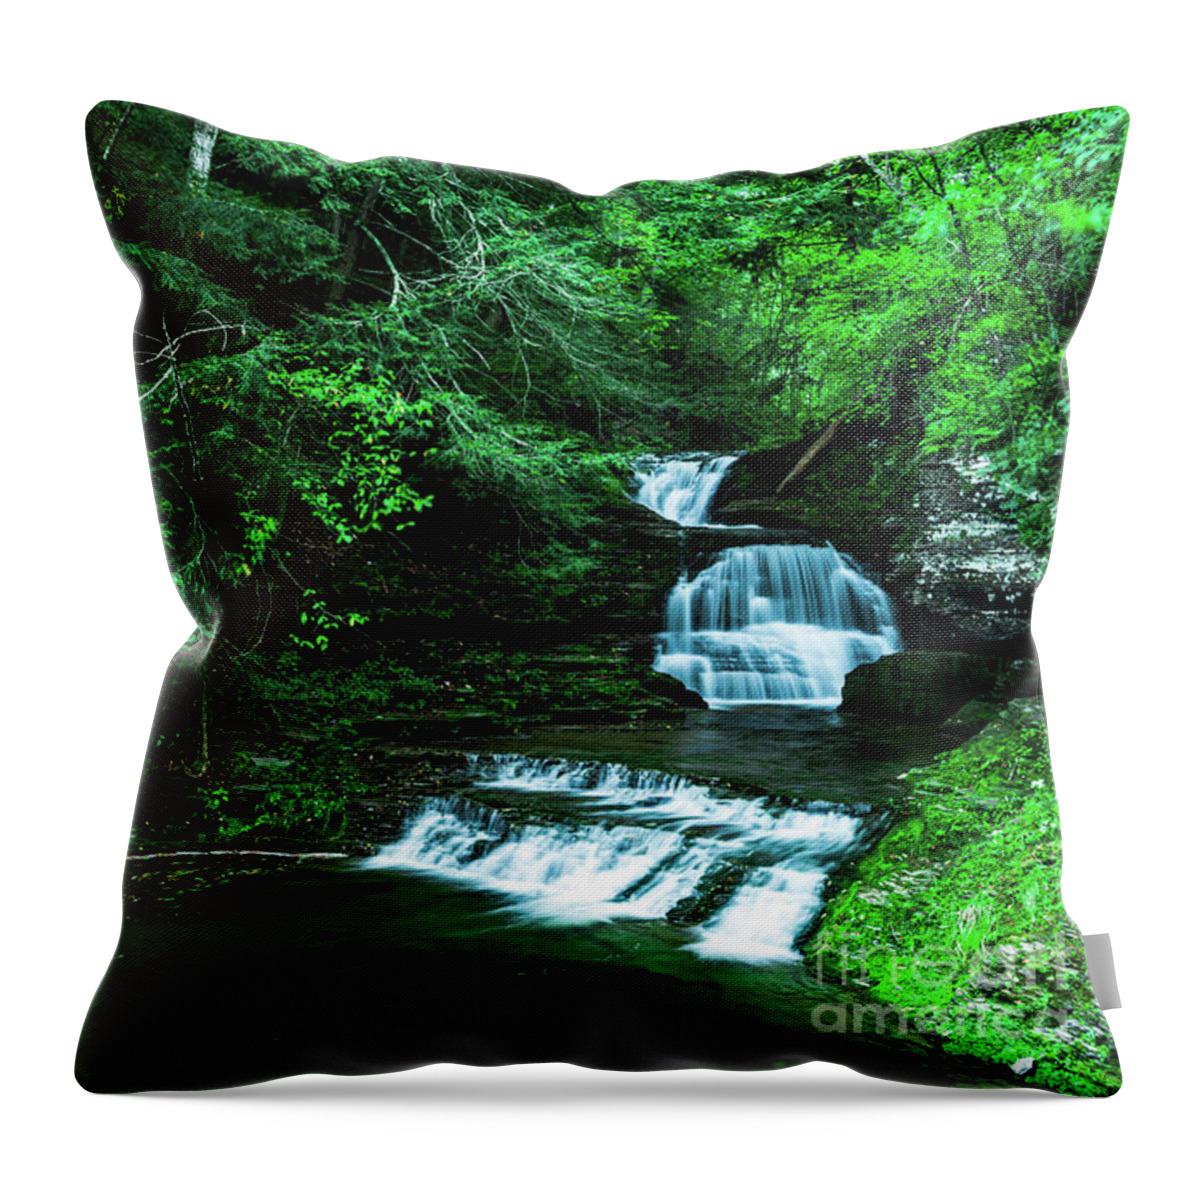 2018 Throw Pillow featuring the photograph Where Is The Lake by Stef Ko